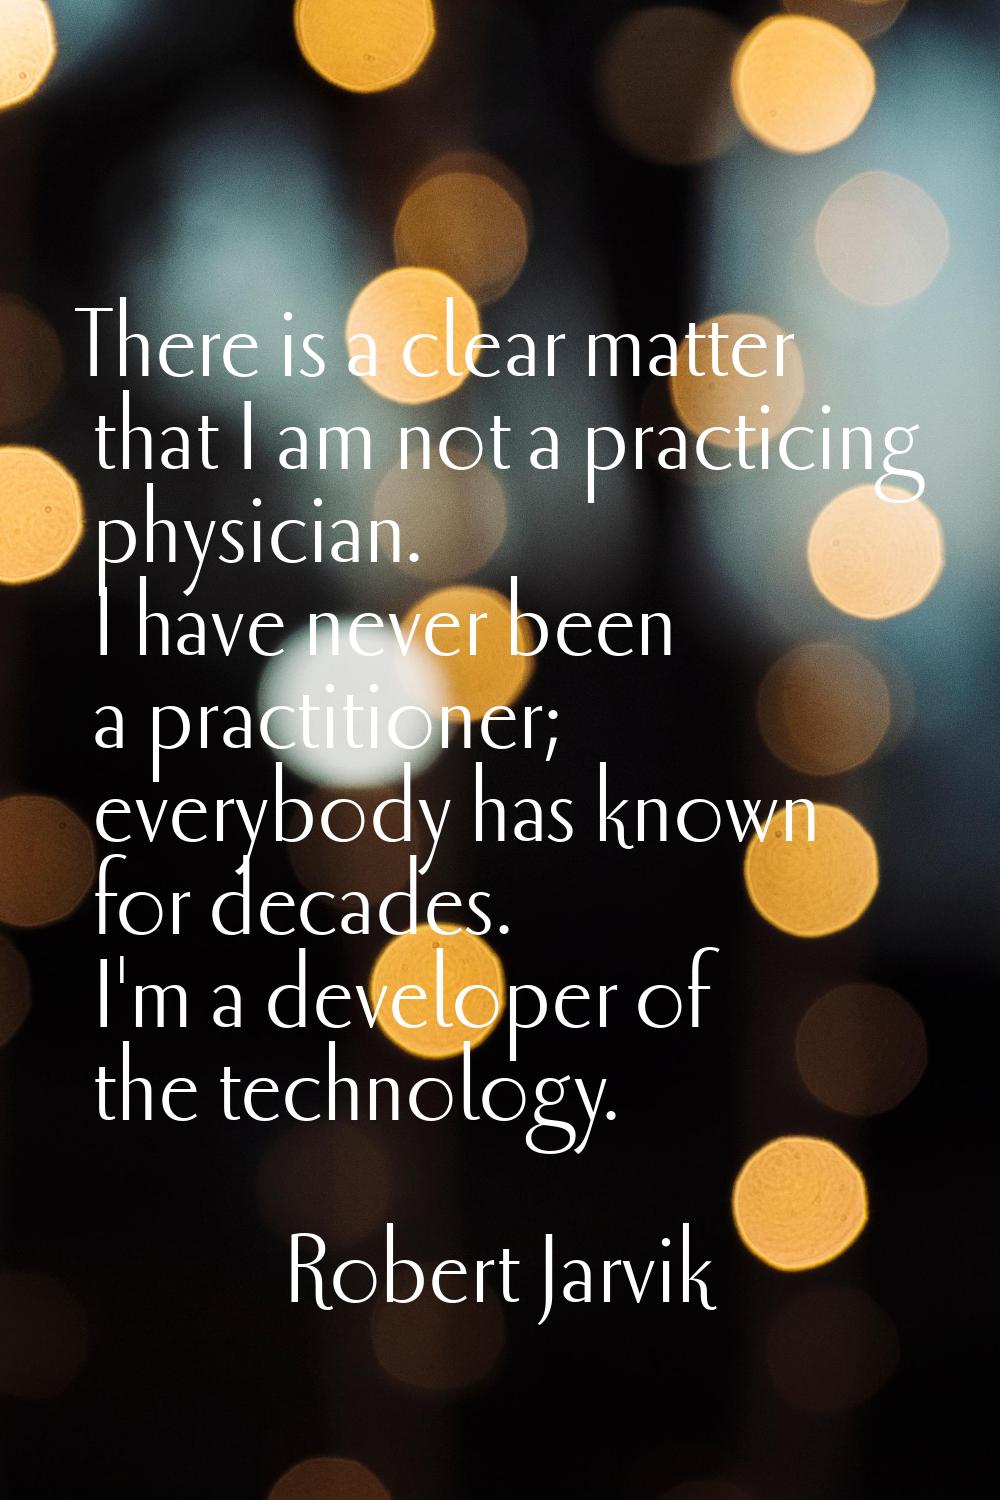 There is a clear matter that I am not a practicing physician. I have never been a practitioner; eve